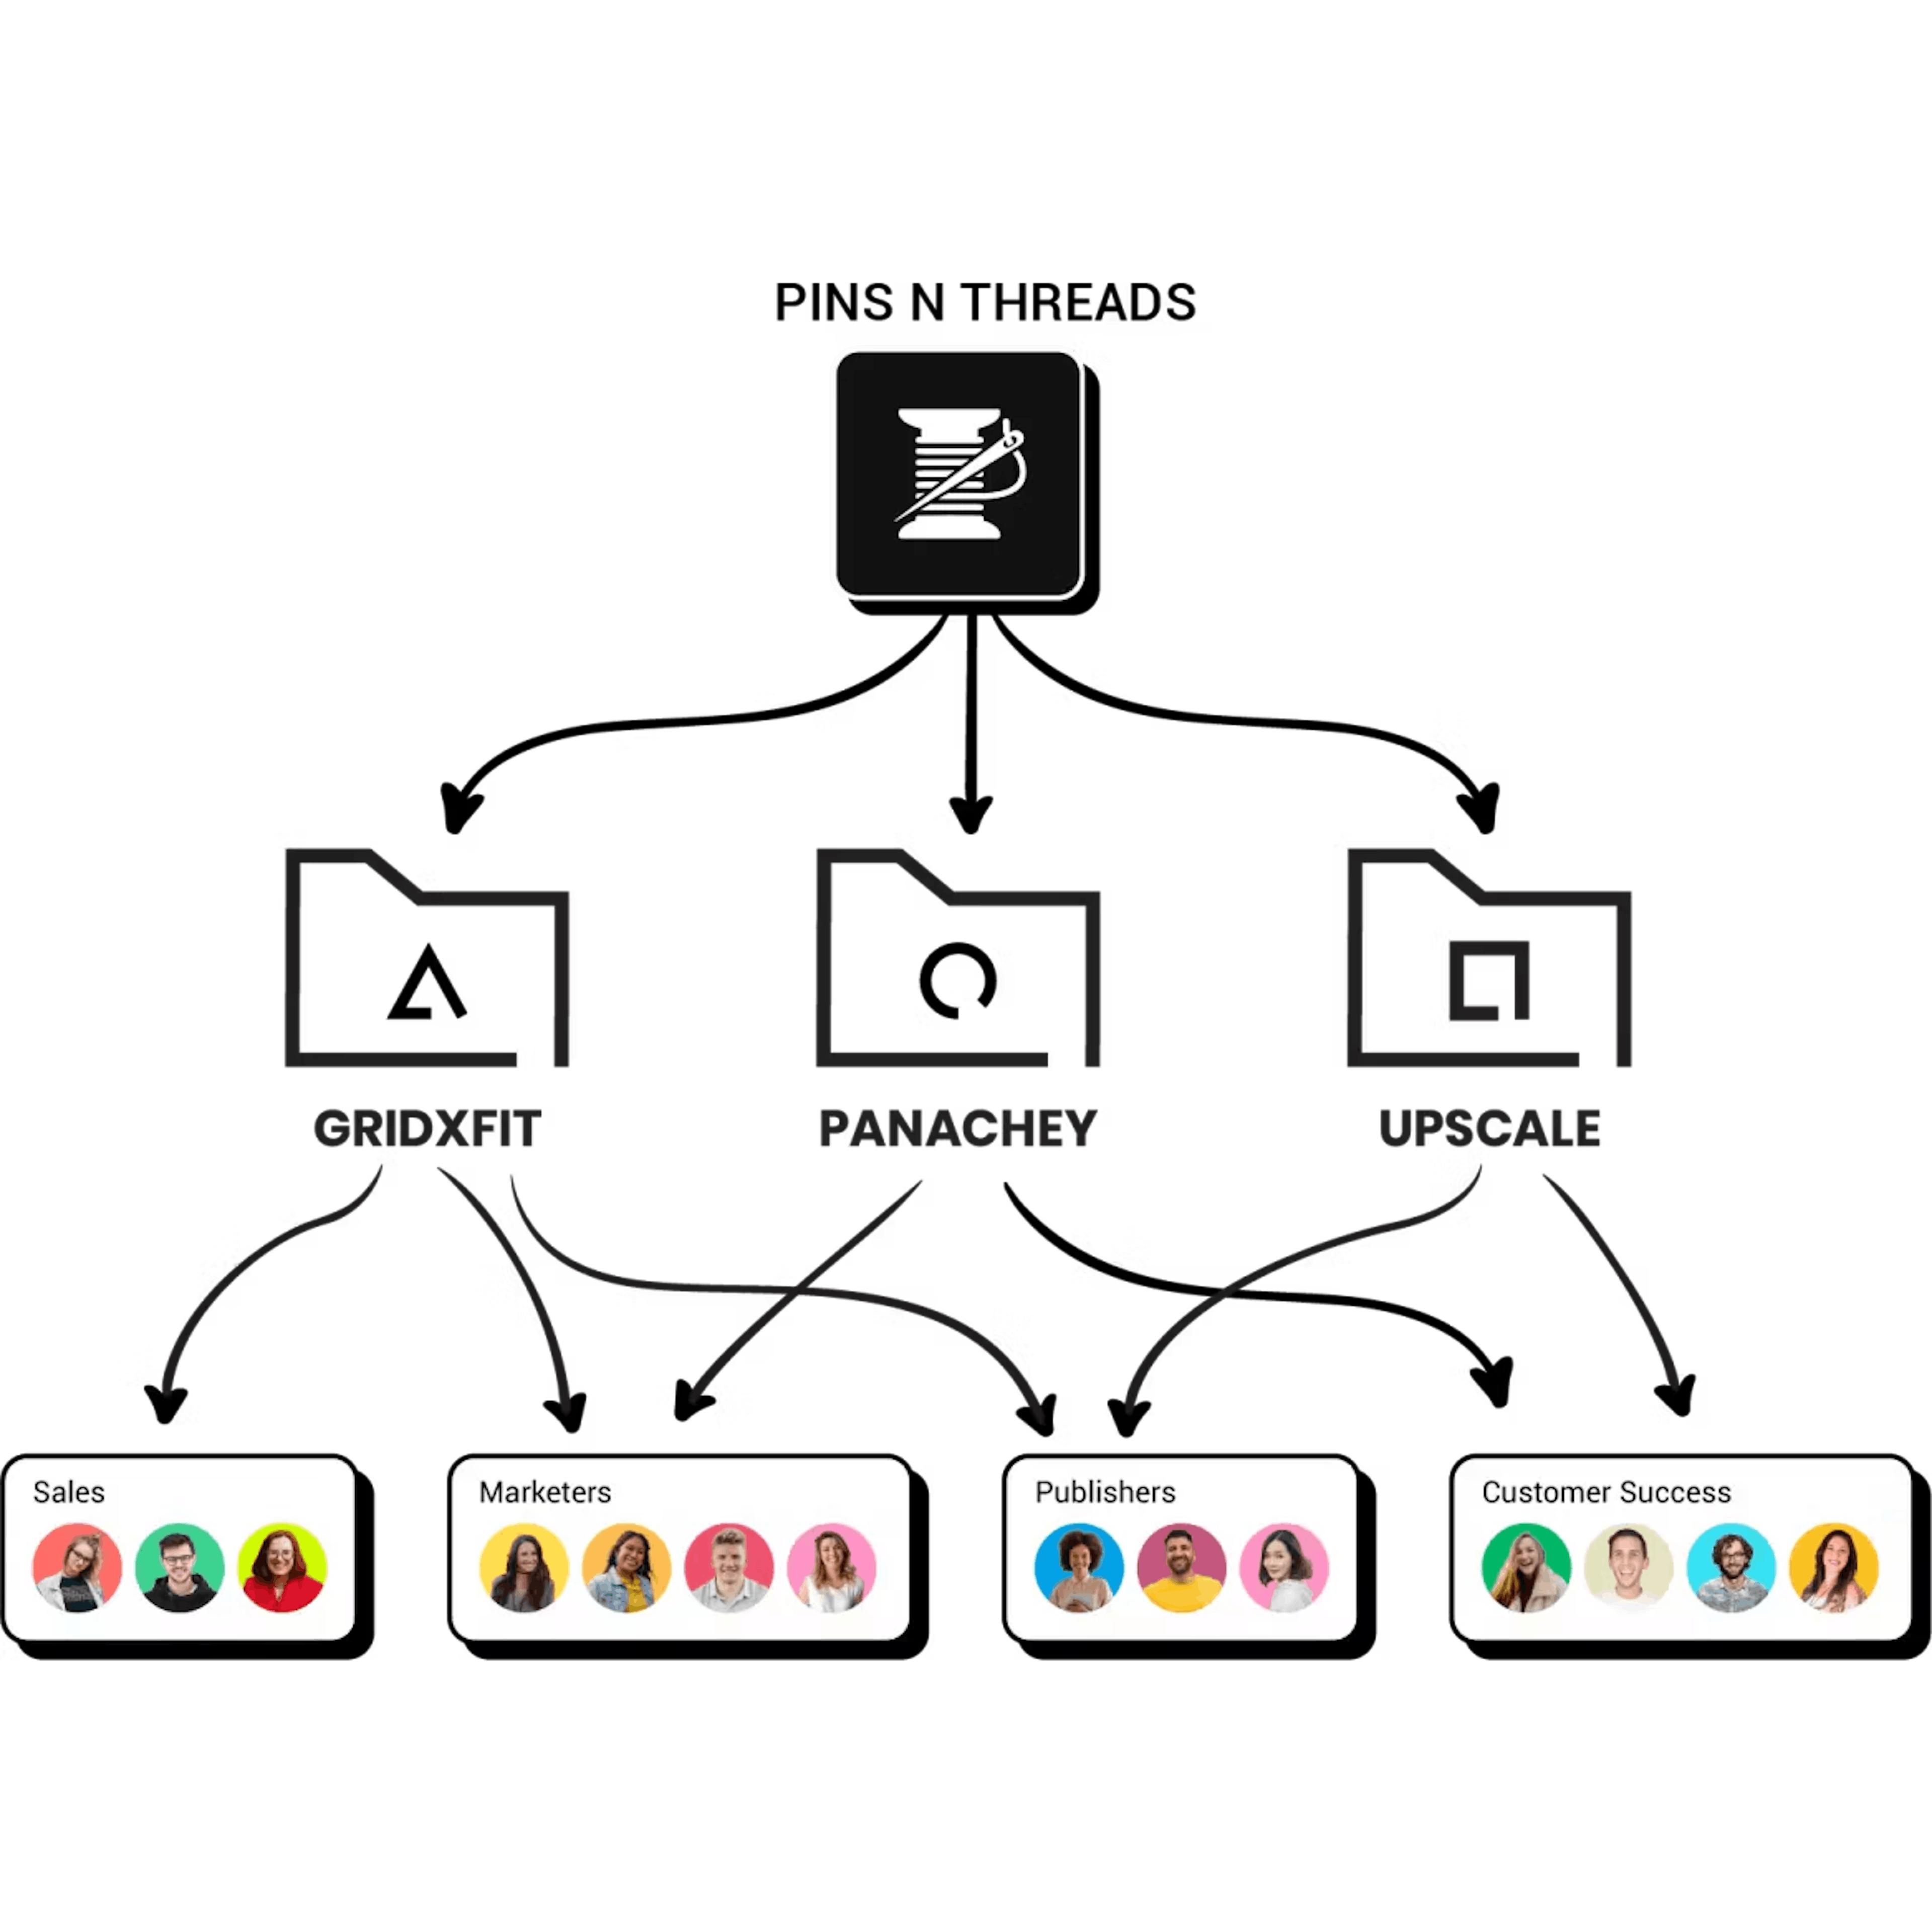 An-image-presenting-the-hierarchical-permissions-structure (Statusbrew)